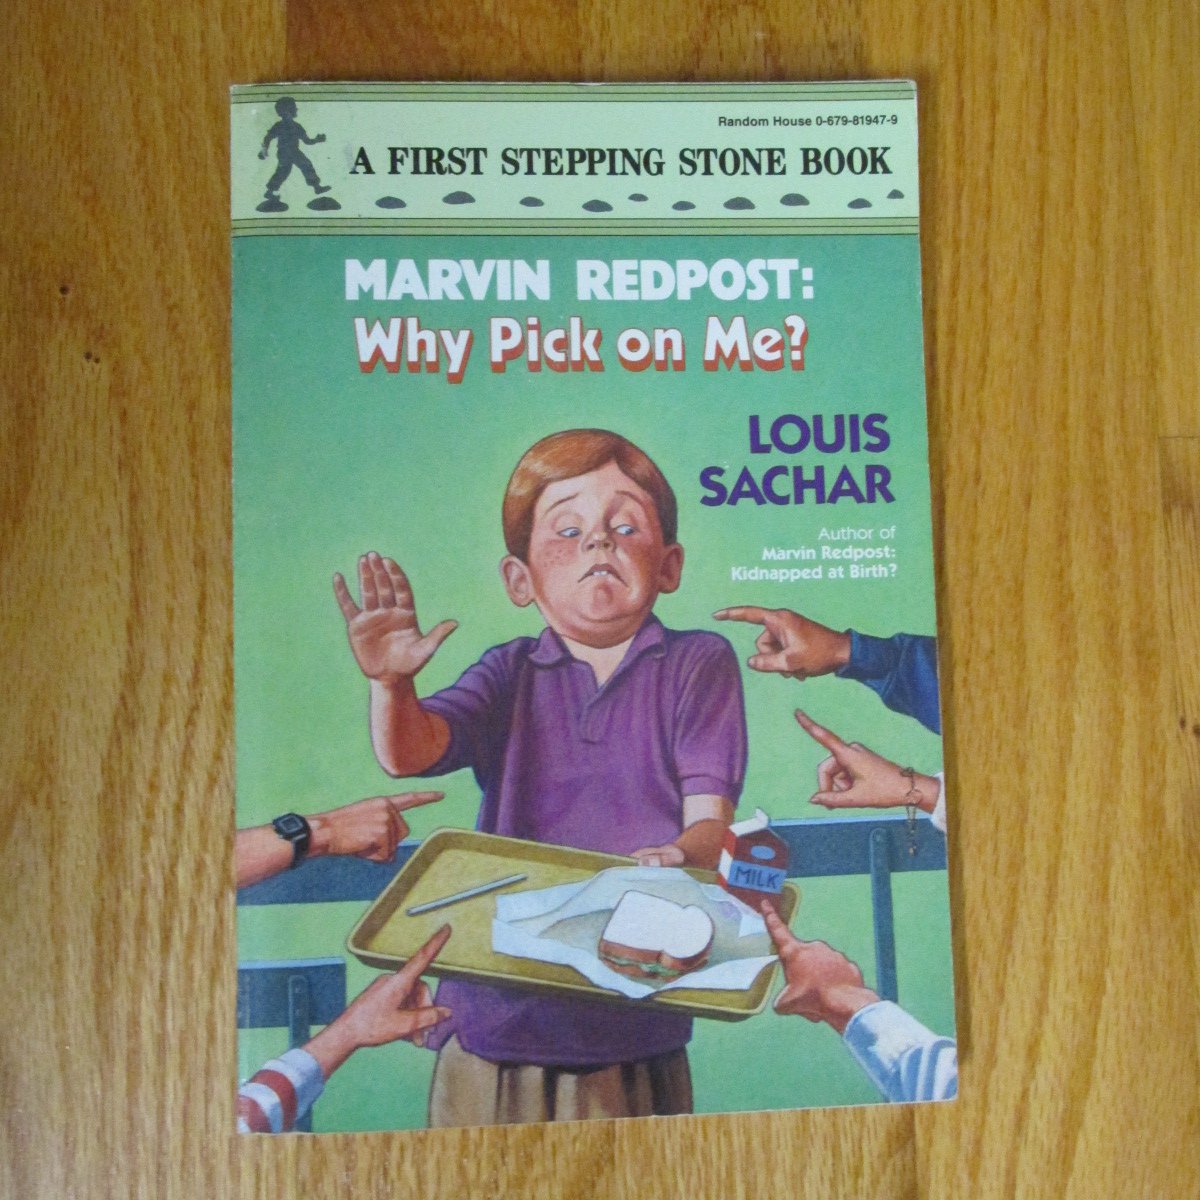 Marvin Redpost #2: Why Pick on Me? eBook by Louis Sachar - EPUB Book